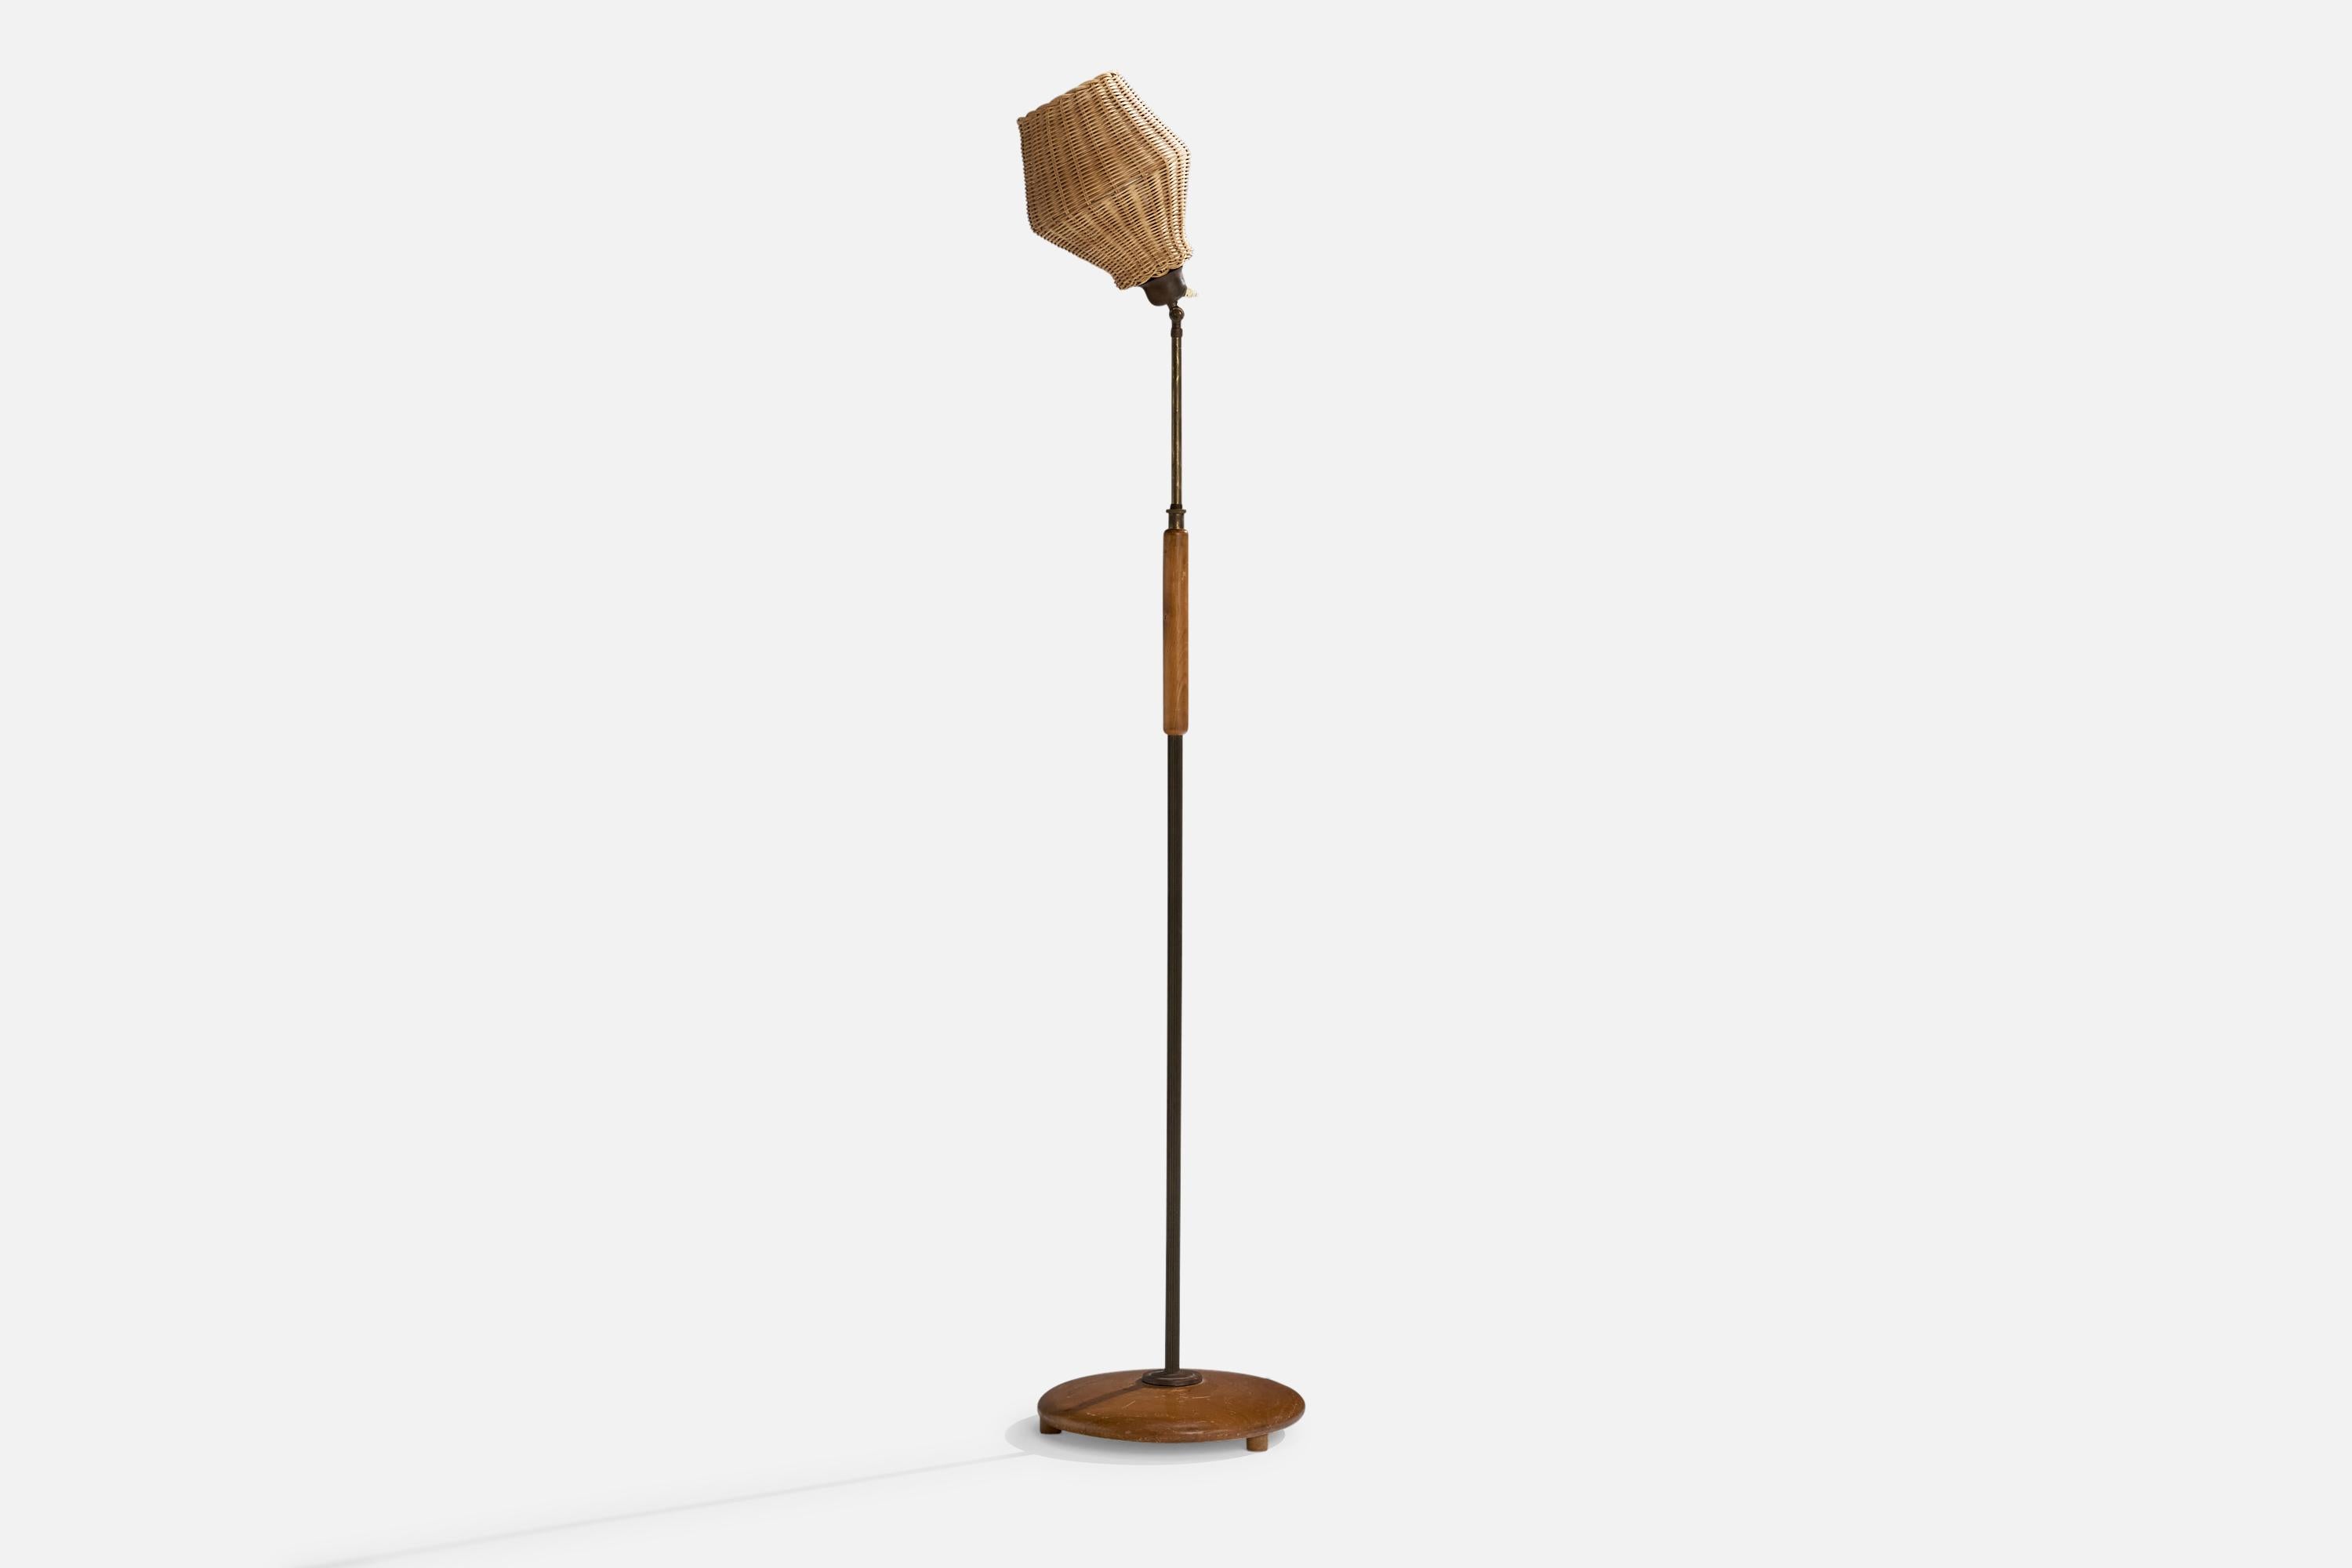 An adjustable brass, oak and rattan floor lamp designed and produced in Sweden, 1950s.

Overall Dimensions (inches): 56.5”  H x 13” W x 16.5” D
Stated dimensions include shade.
Bulb Specifications: E-26 Bulb
Number of Sockets: 1
All lighting will be